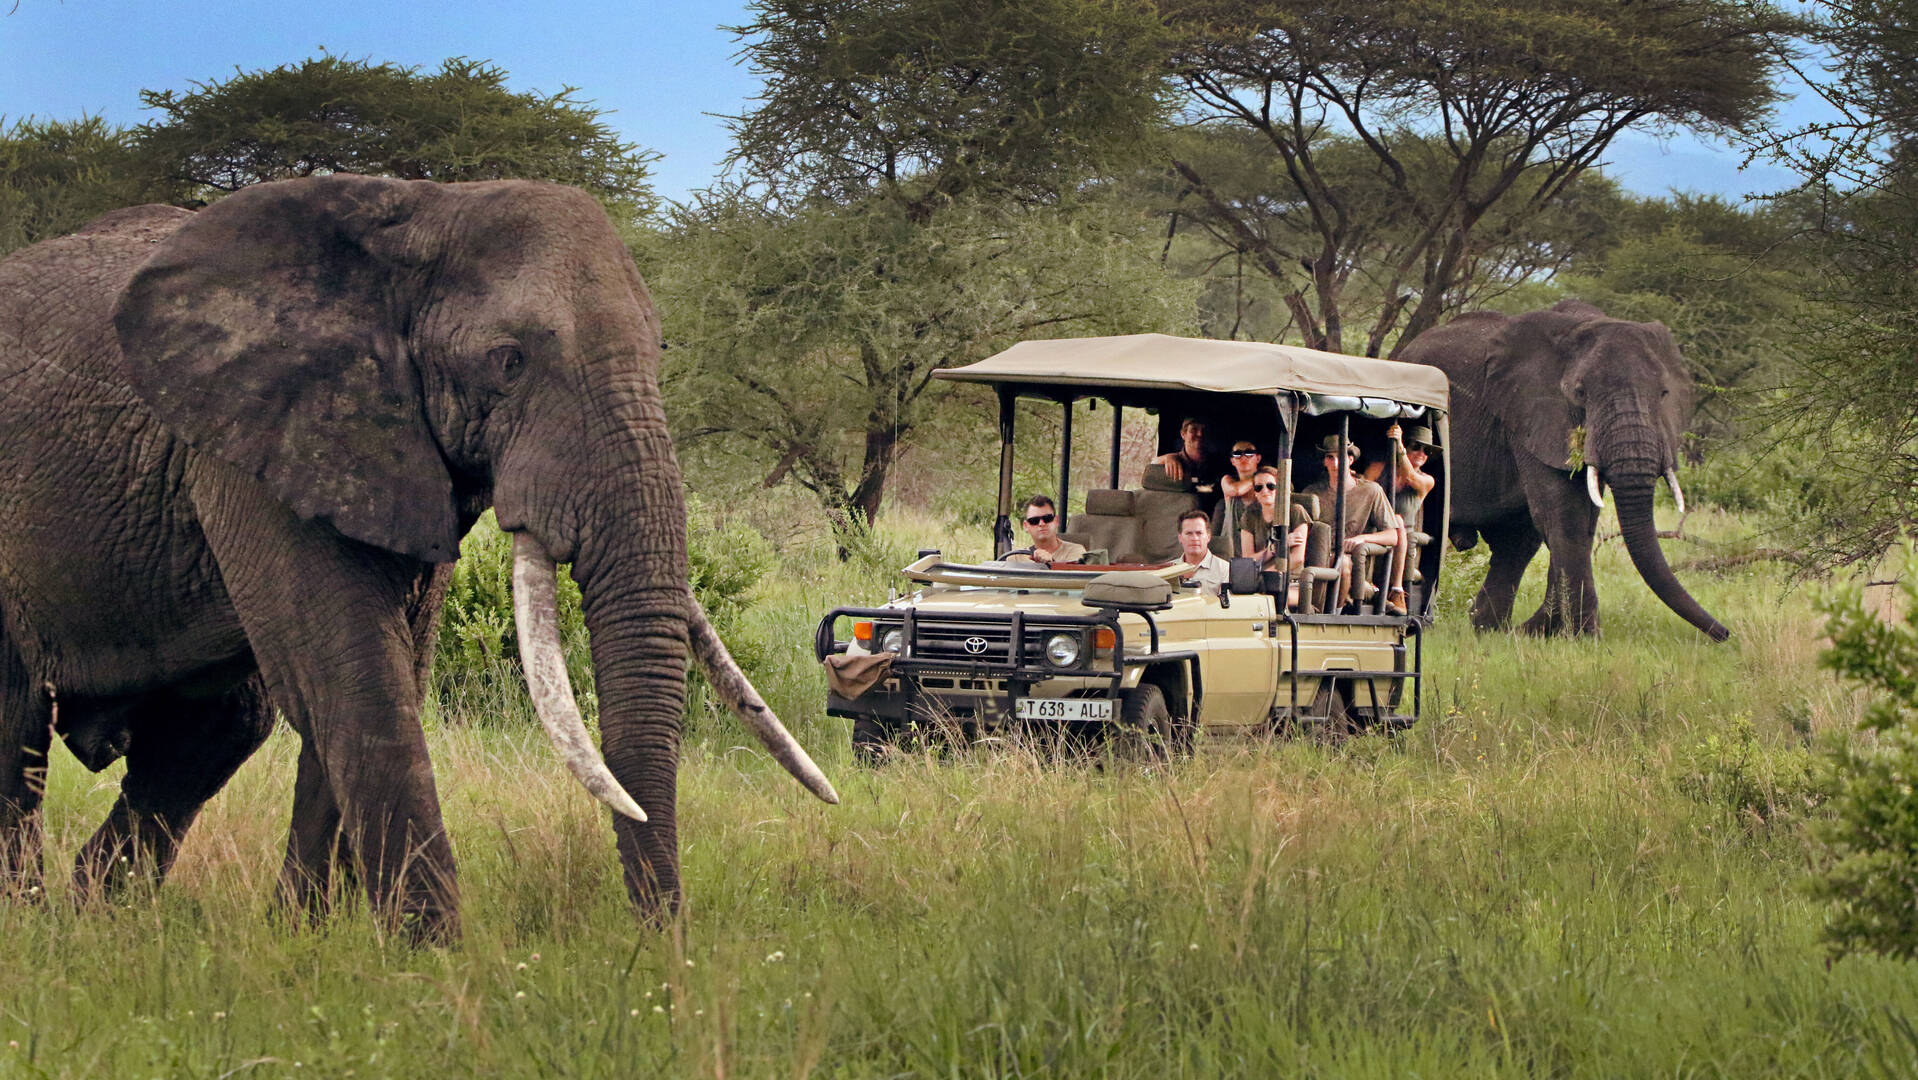 Enjoy A Holiday In Northern Tanzania With A Private Expert Safari Guide